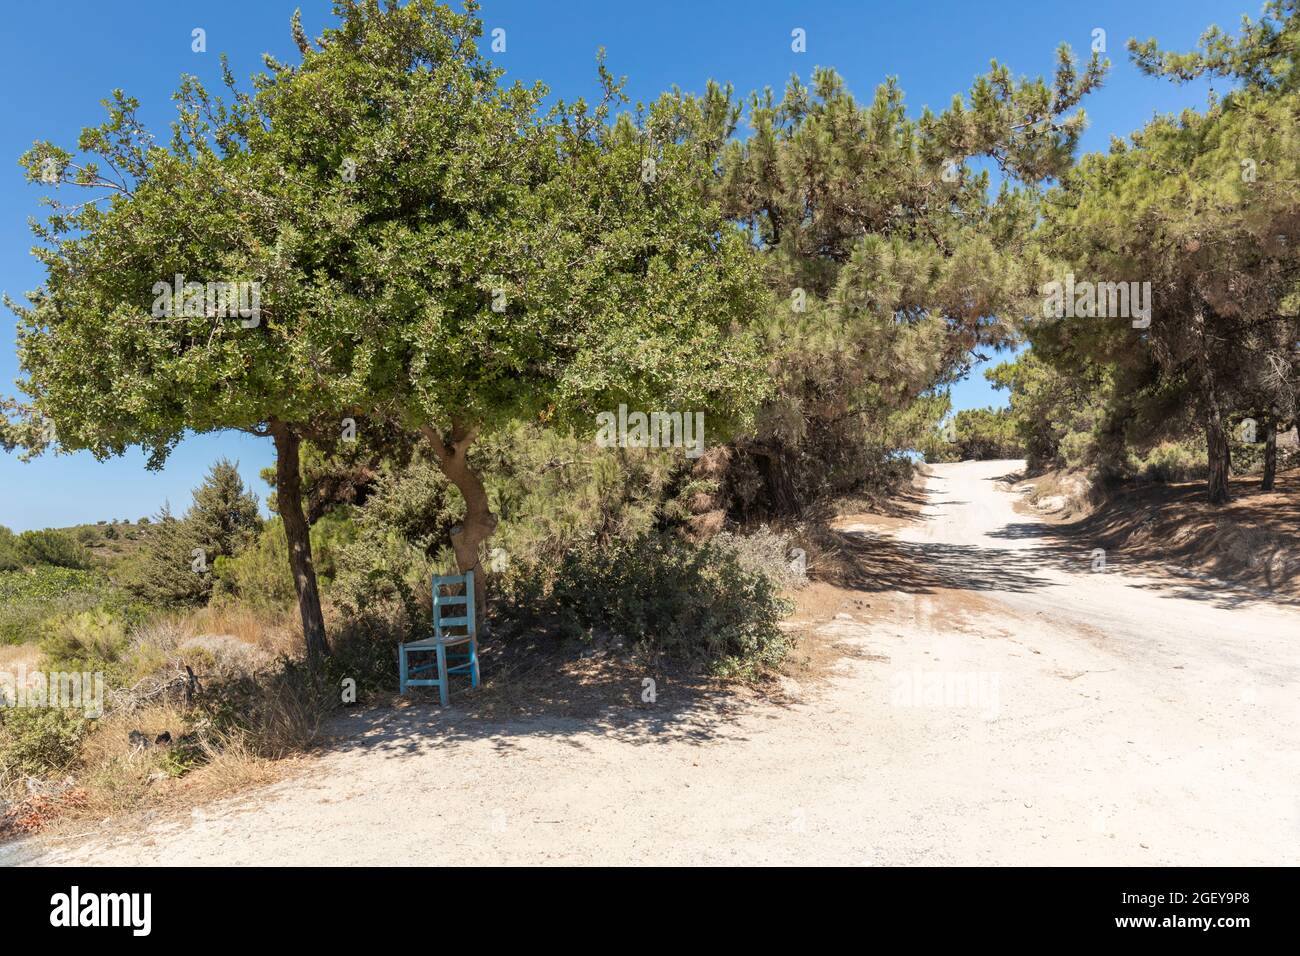 Country road in the mountains of Kefalos with a blue chair in the shade under a tree. Off the beaten track. Kos, Dodecanese Islands, Greece Stock Photo